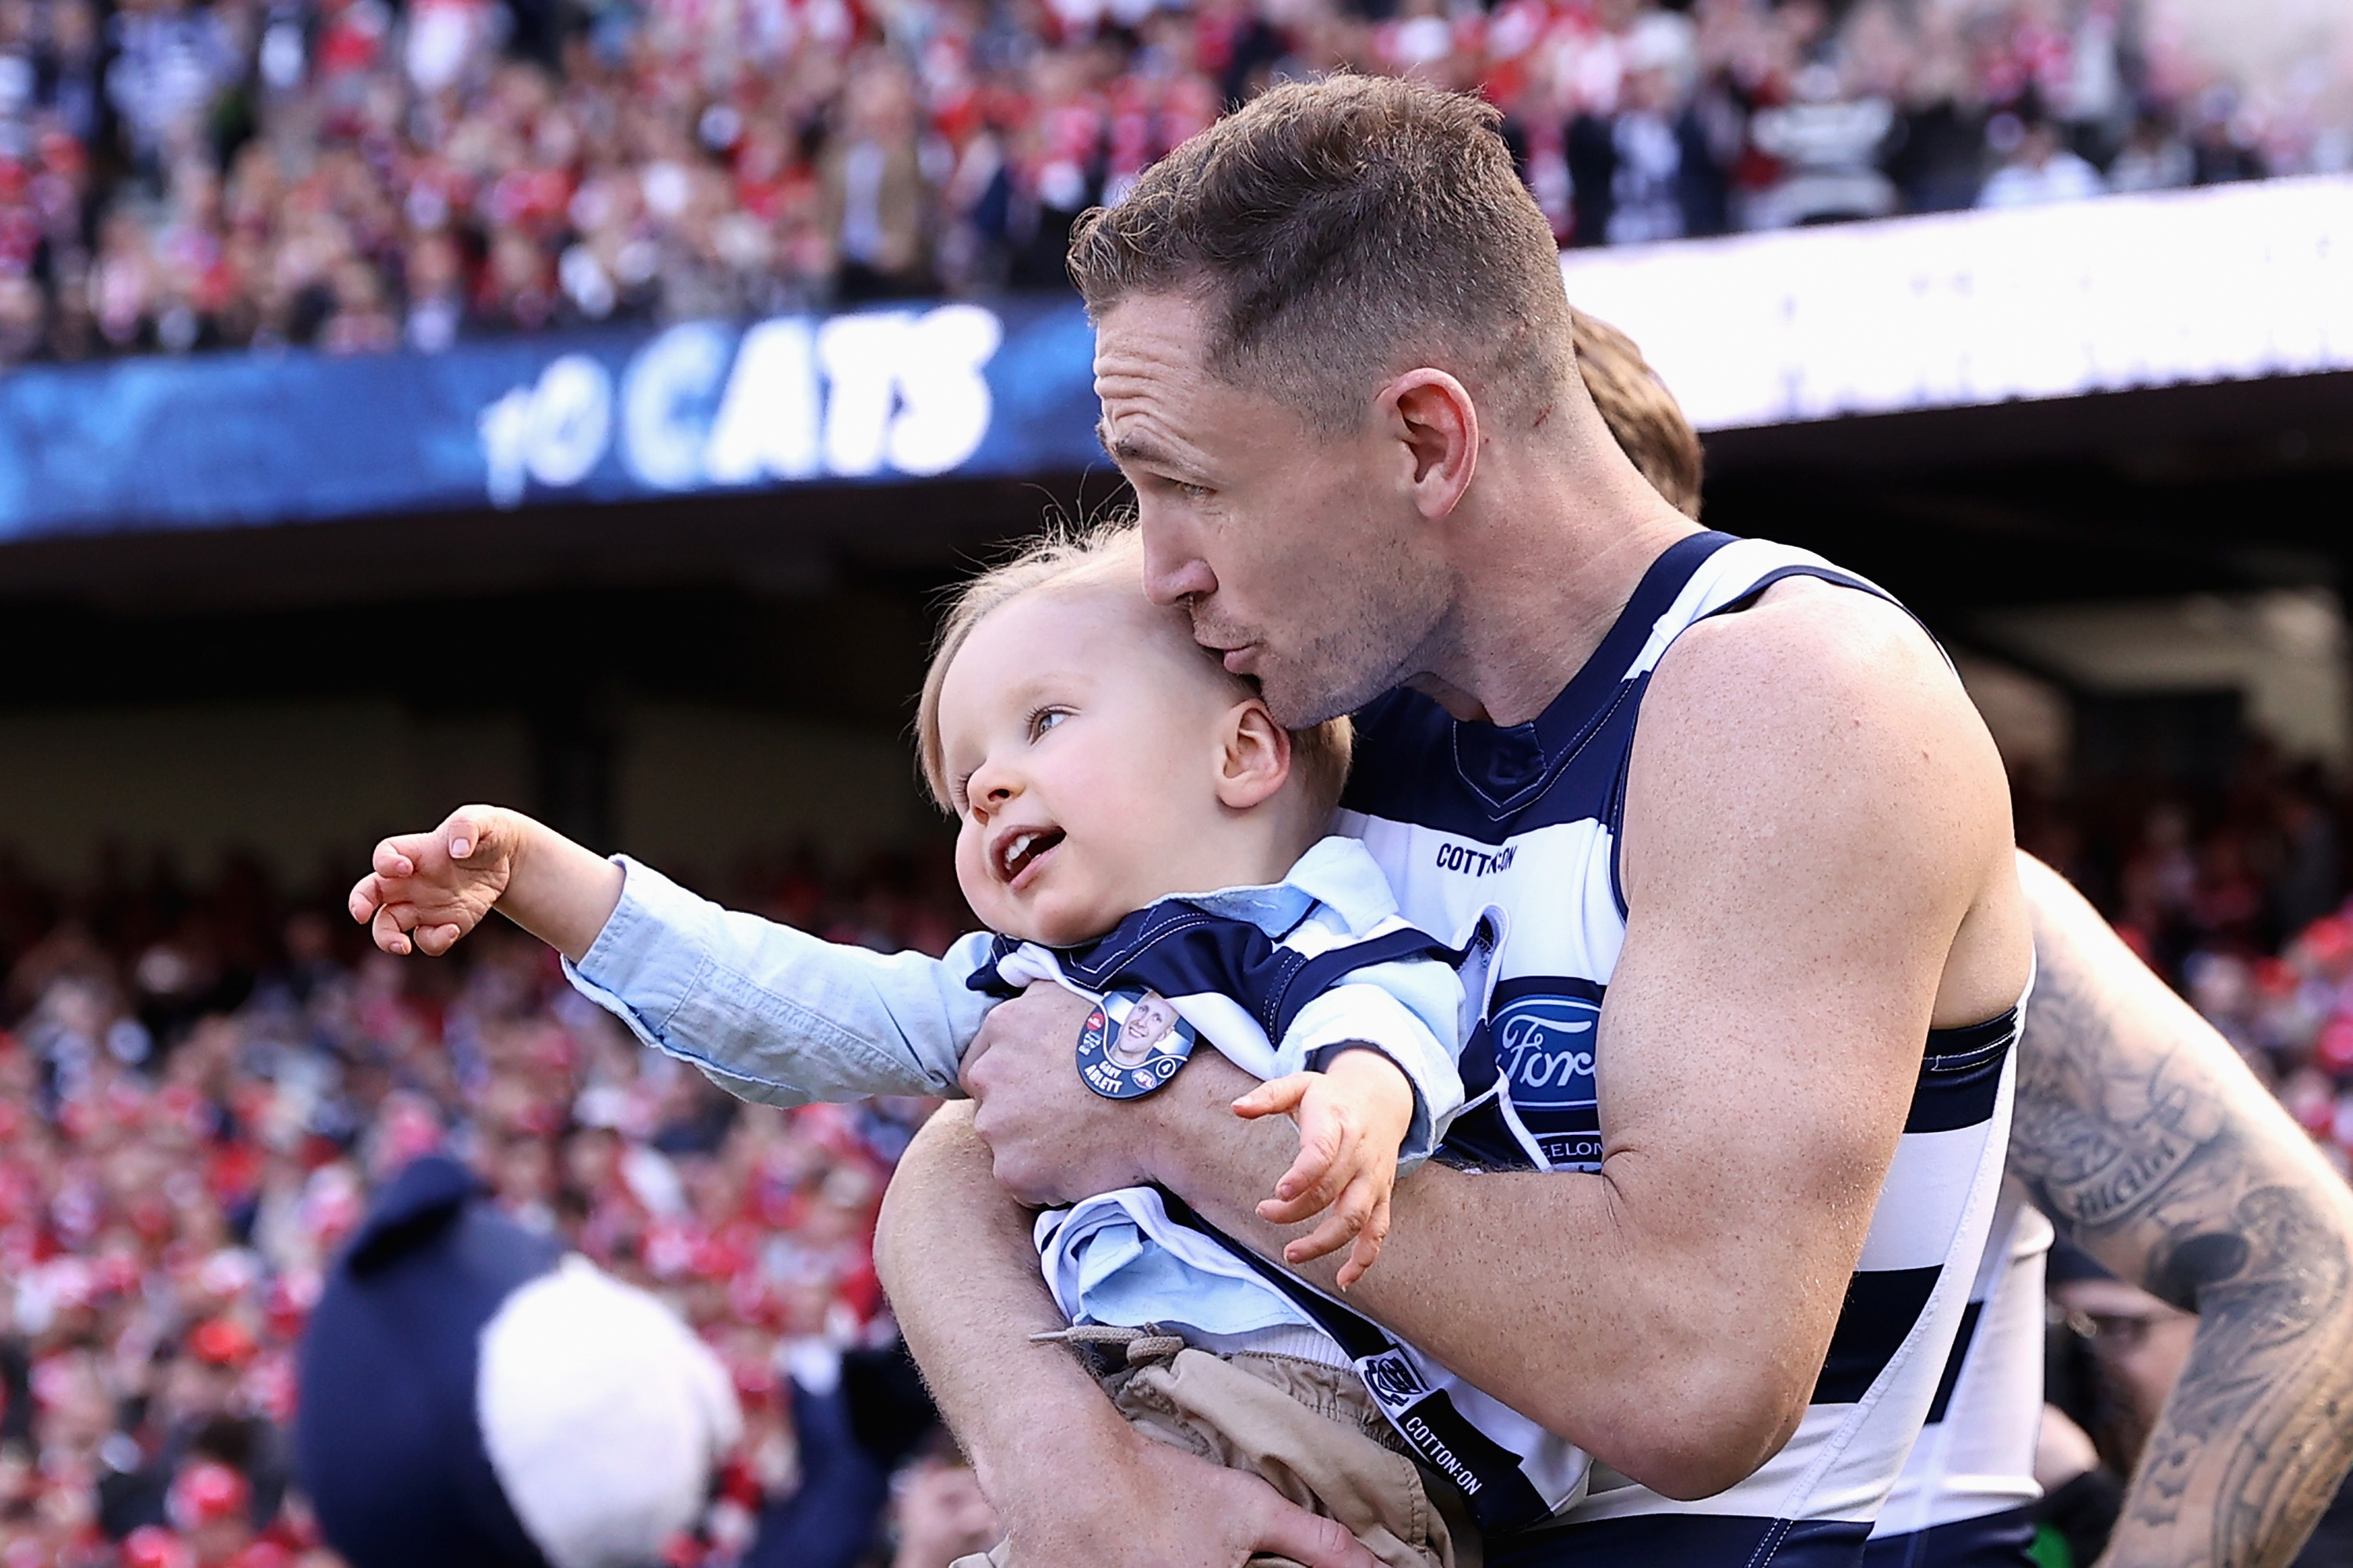 Joel Selwood of the Cats and Levi Ablett enter the field during the 2022 AFL Grand Final match between the Geelong Cats and the Sydney Swans at the Melbourne Cricket Ground on September 24, 2022 in Melbourne, Australia. (Photo by Cameron Spencer/AFL Photos/via Getty Images)